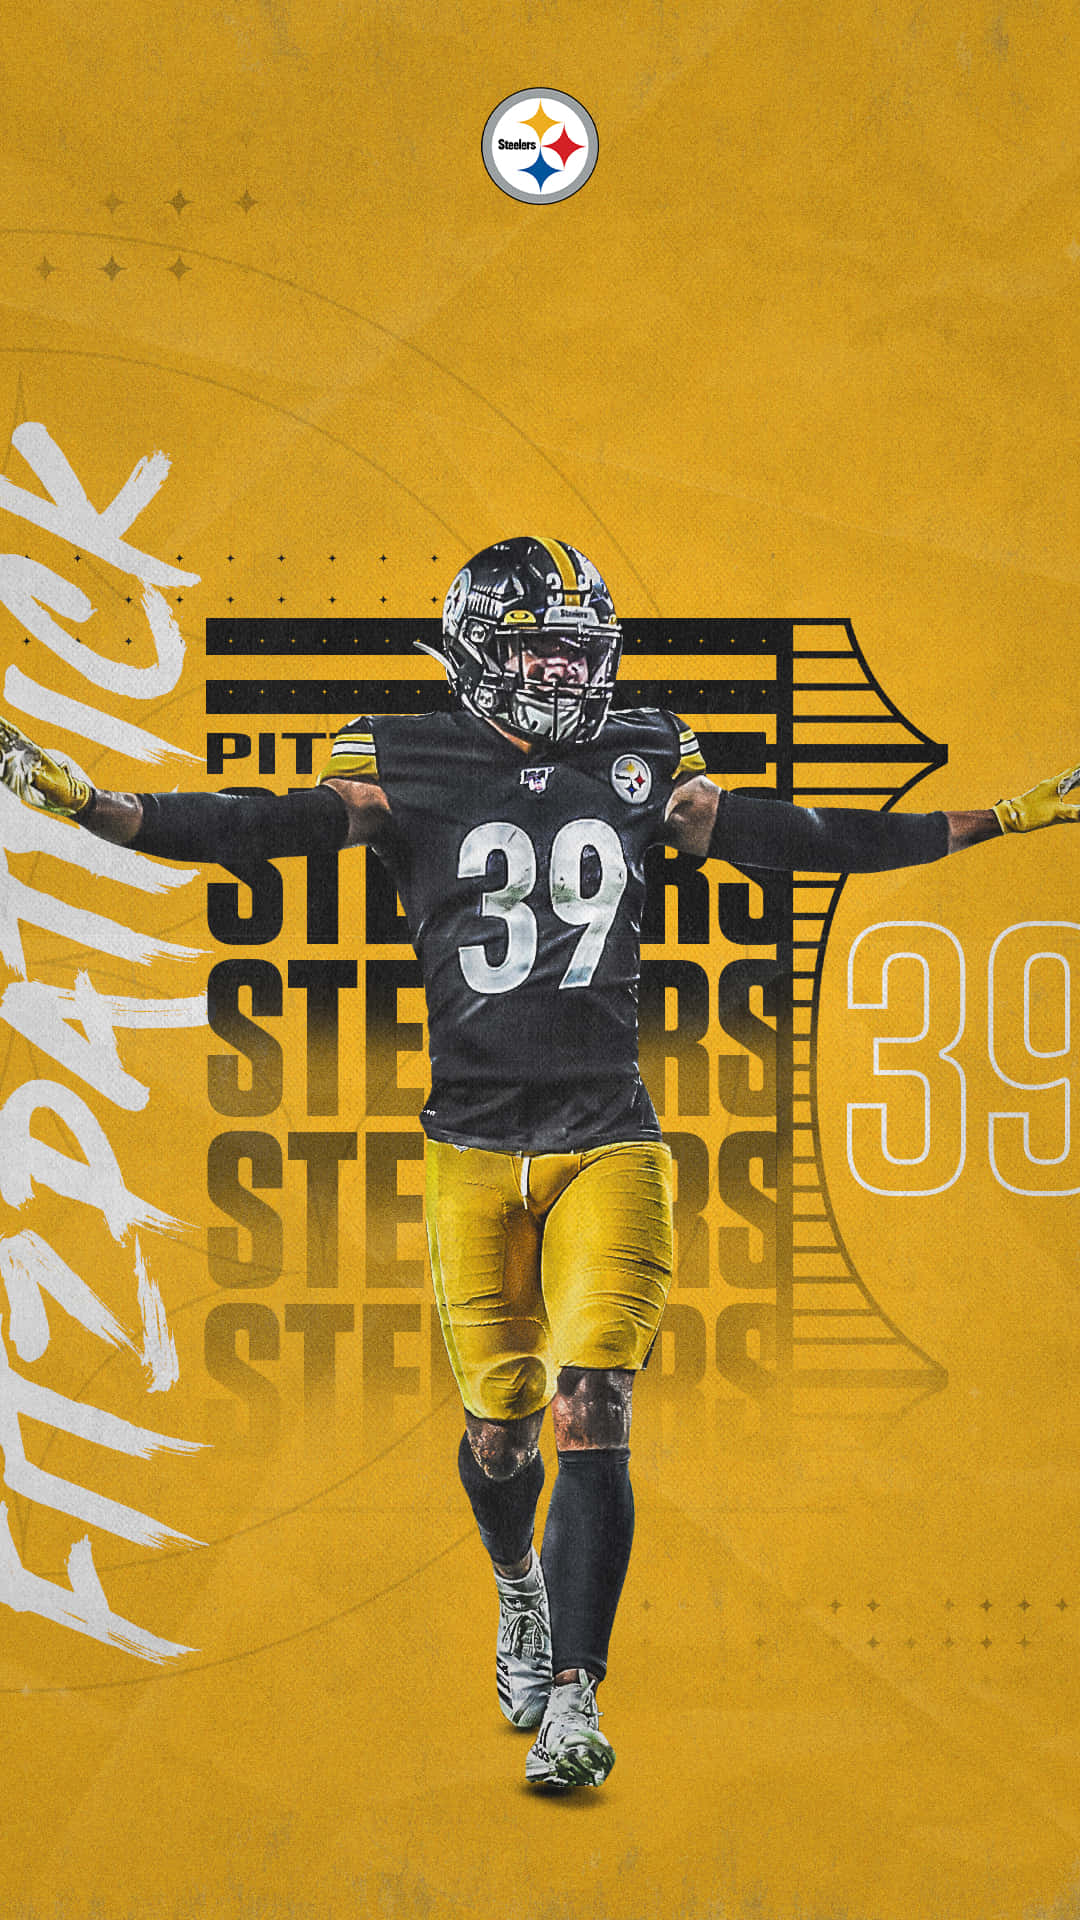 Get ready for game day with the Official Pittsburgh Steelers iPhone Wallpaper